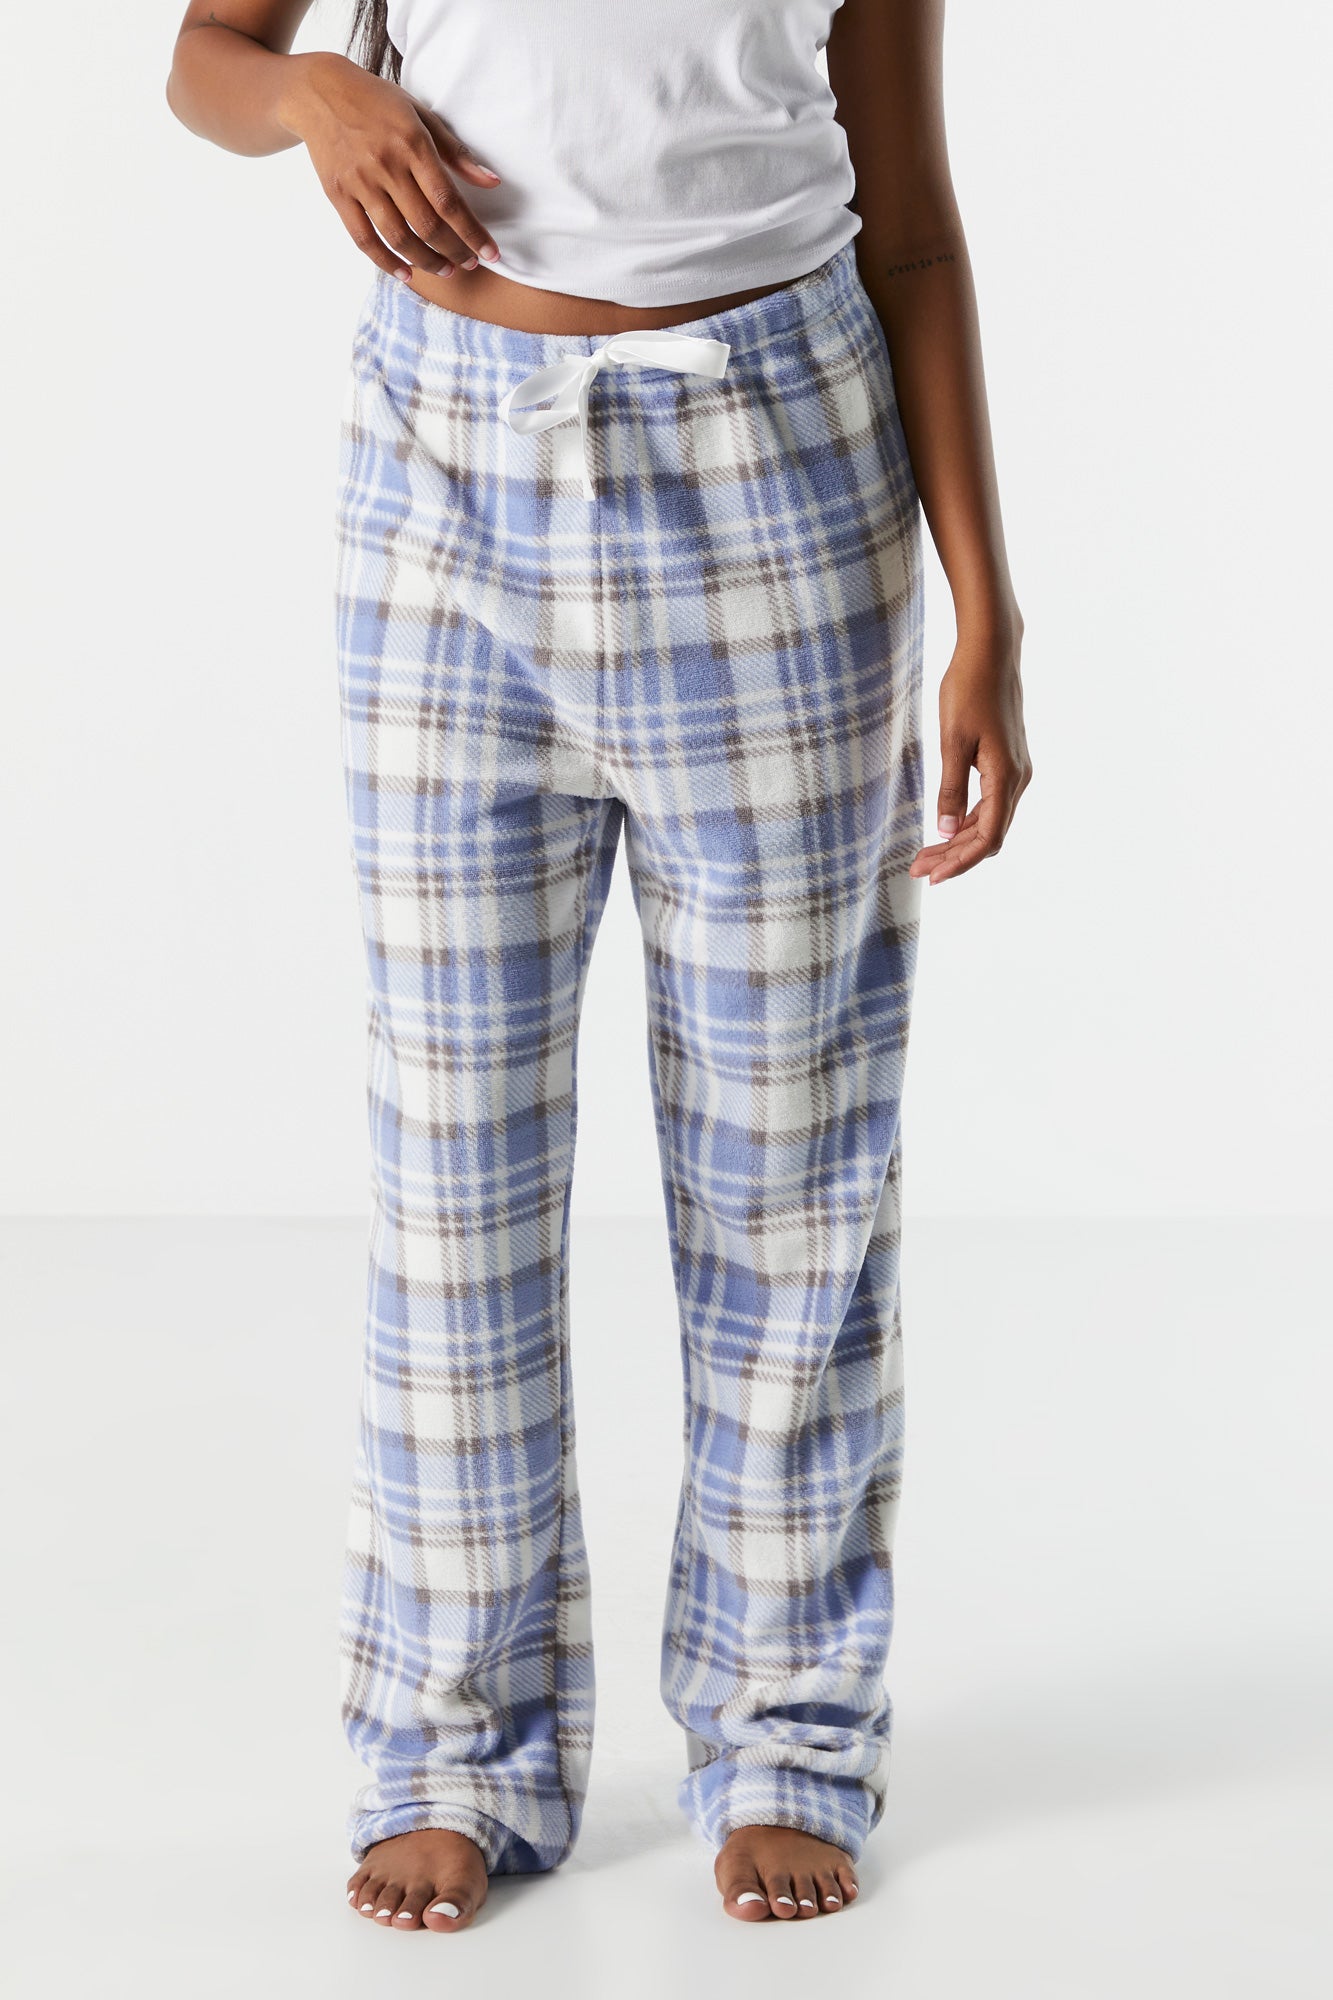 Only 7.99 usd for Blue Plaid Print Plush Pajama Pant Online at the